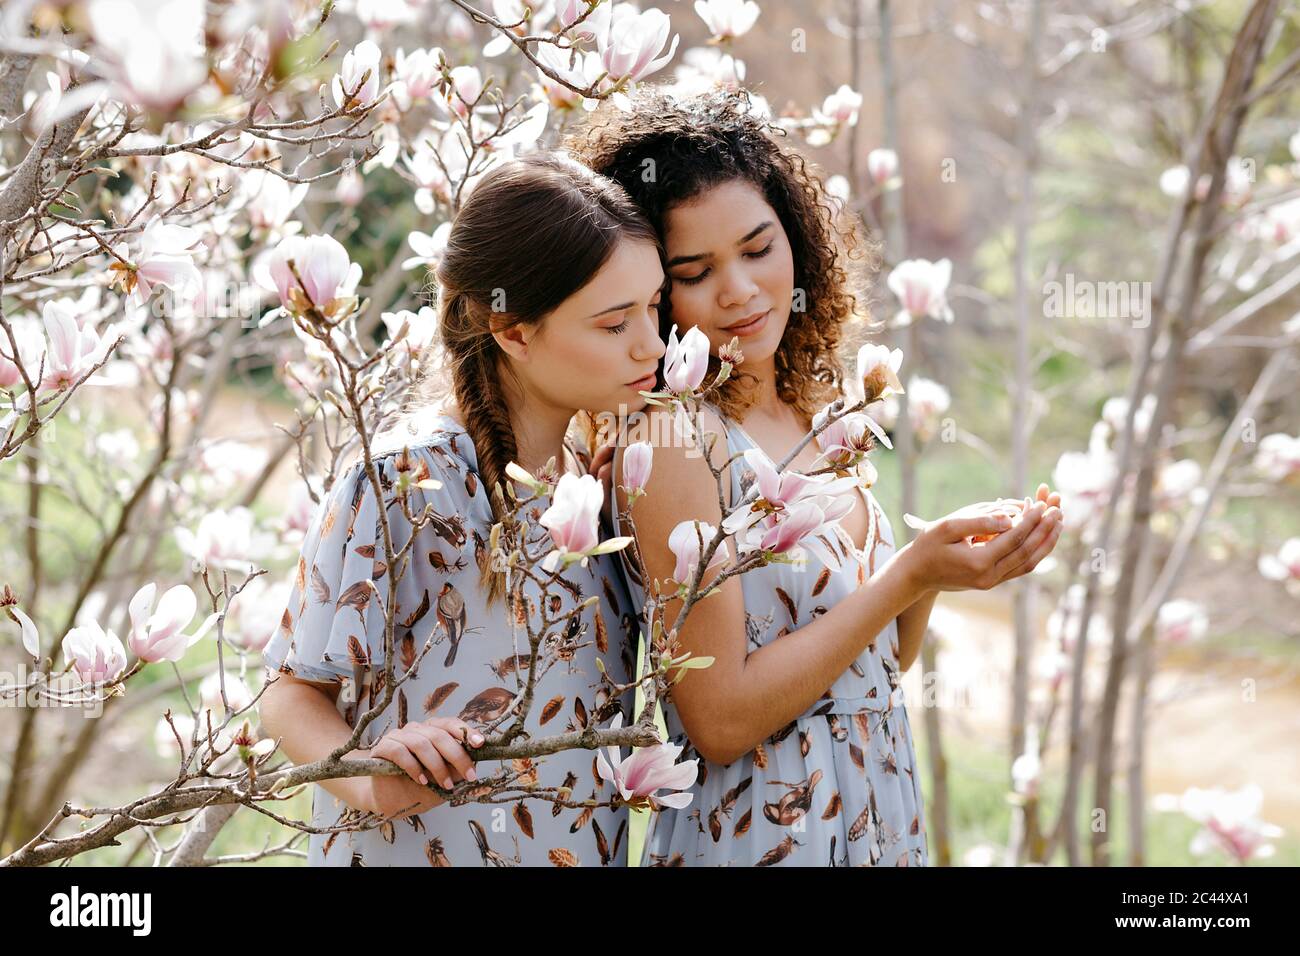 Loving sisters with eyes closed embracing while standing by flowers in park during springtime Stock Photo